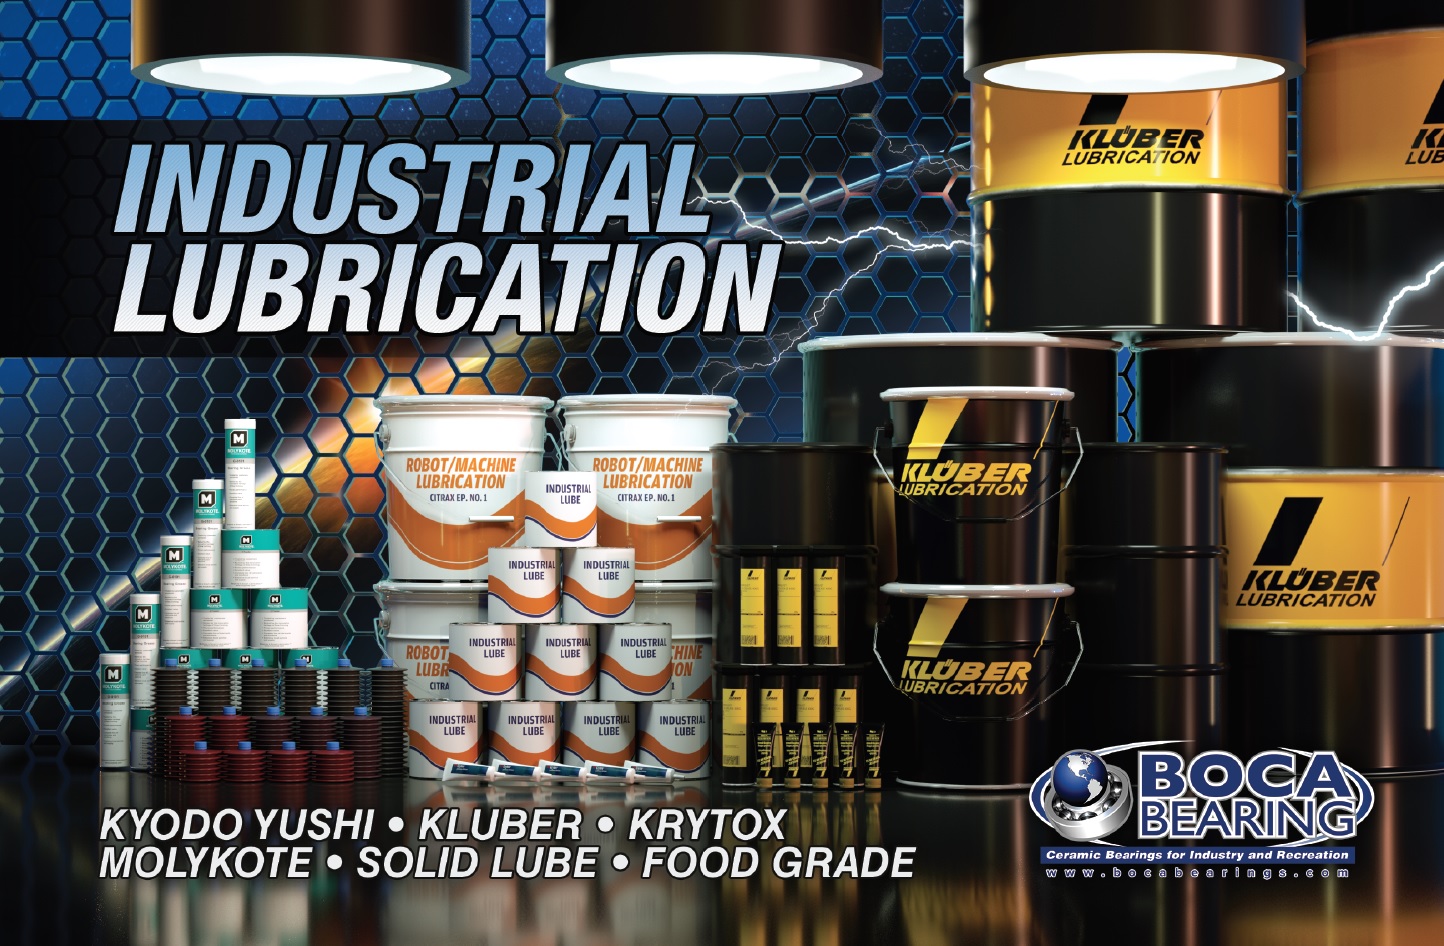 Industrial lubrication offered by Boca Bearing Company